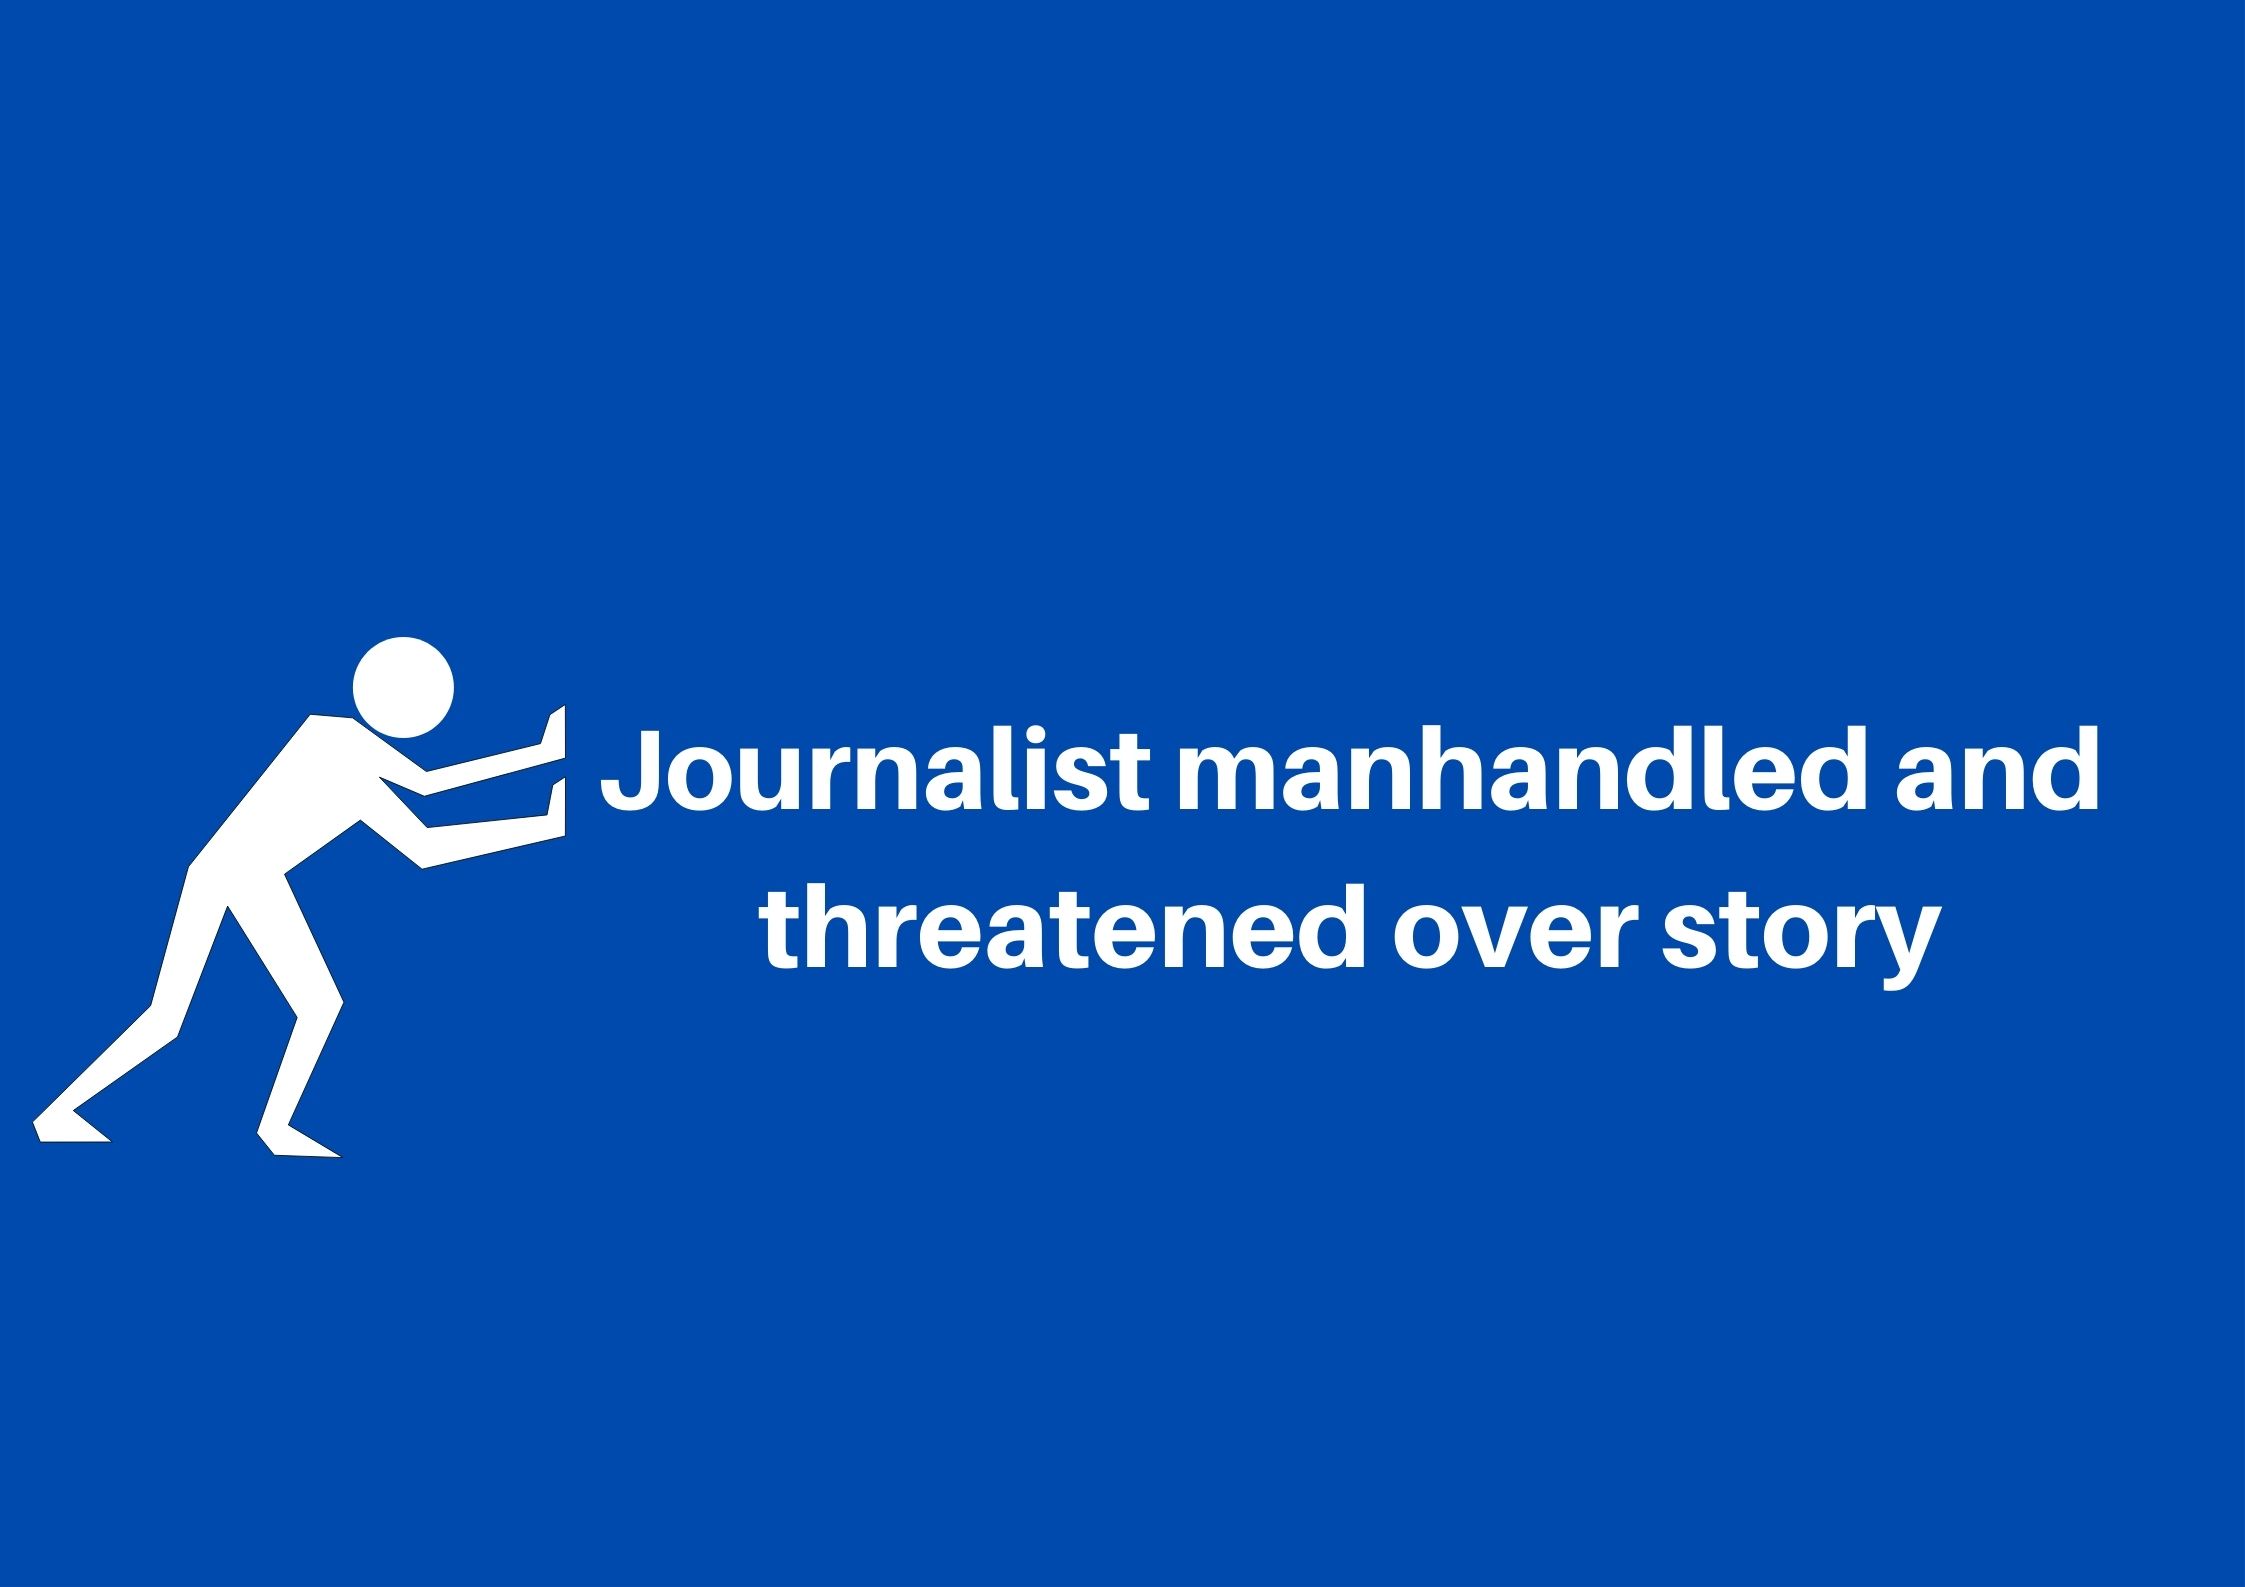 Journalist manhandled and threatened over story